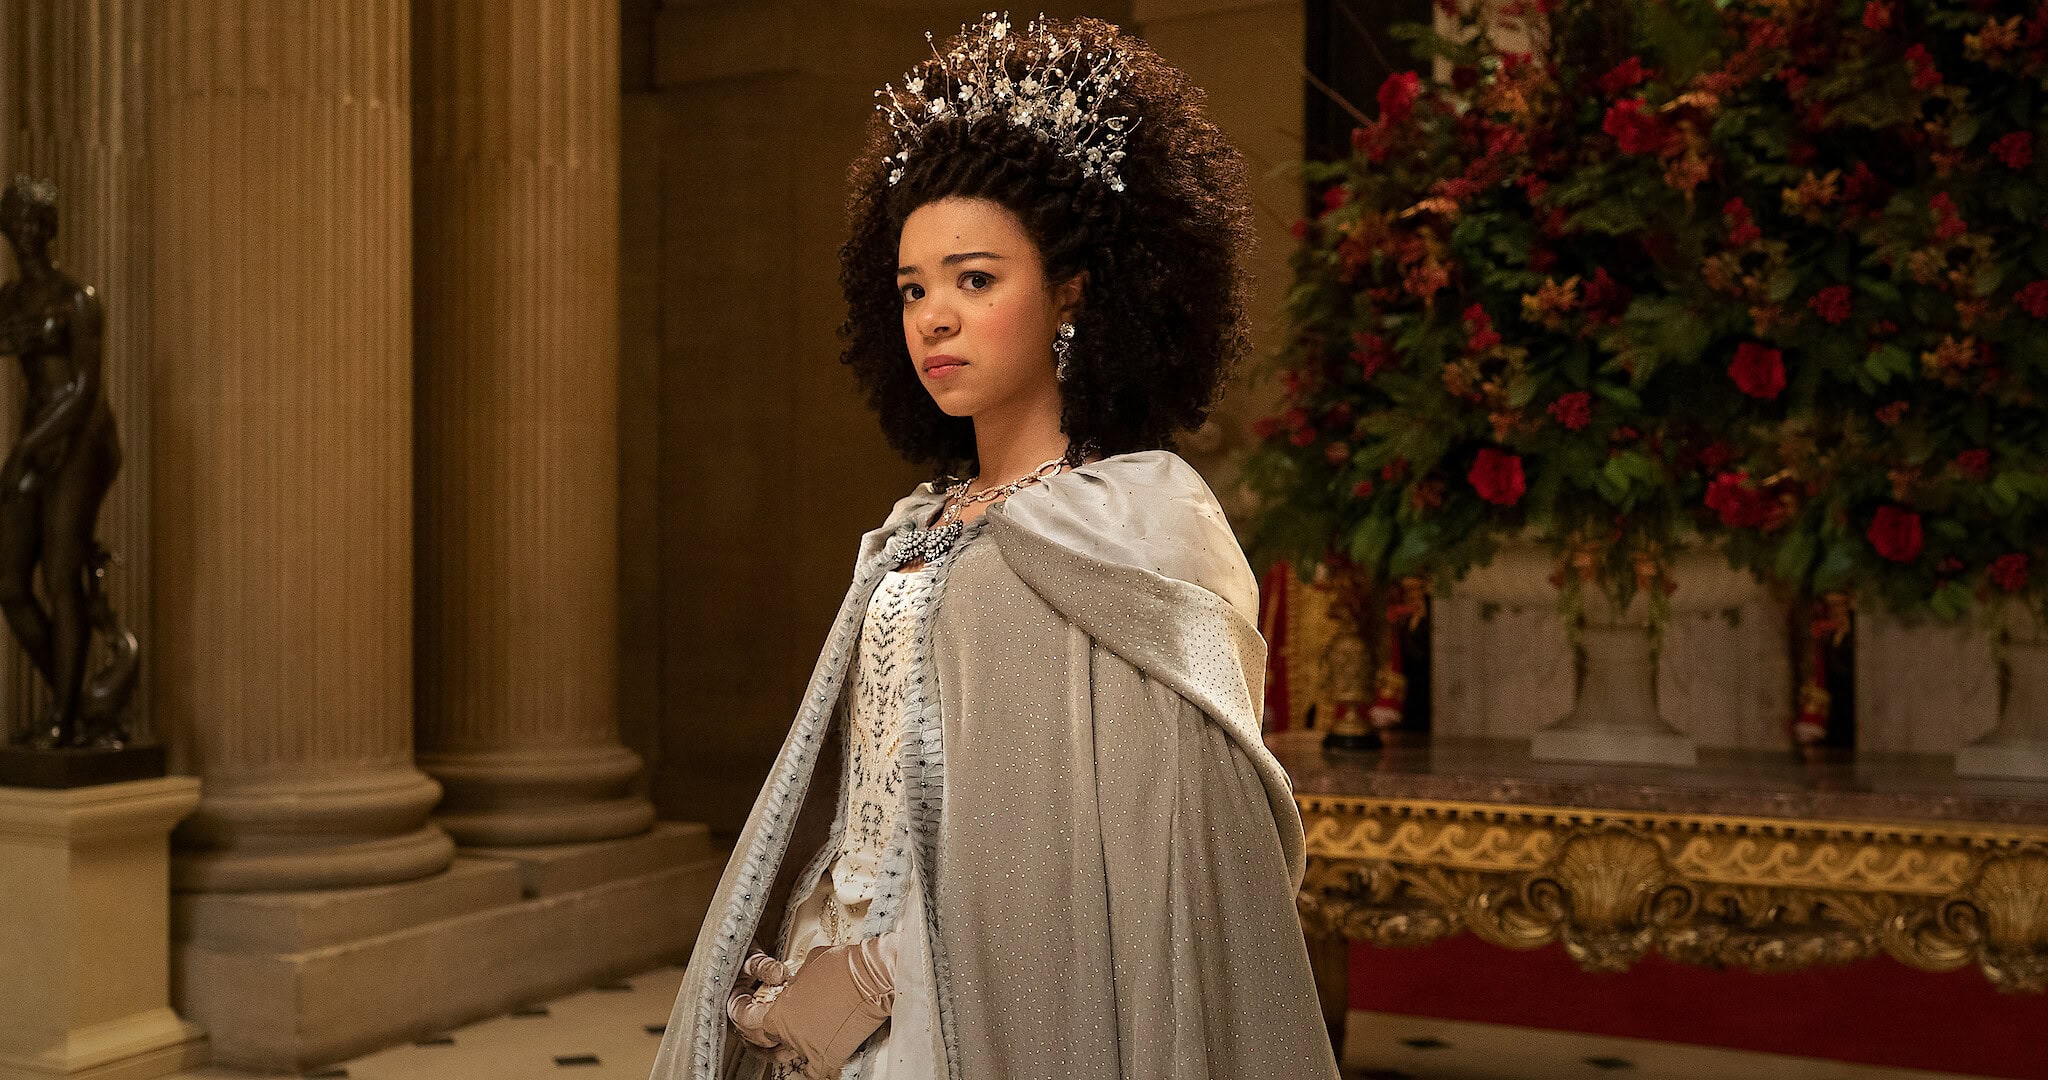 Bridgerton Faces Major Twists in Season 3: A New Lady Whistledown and Queer Romance